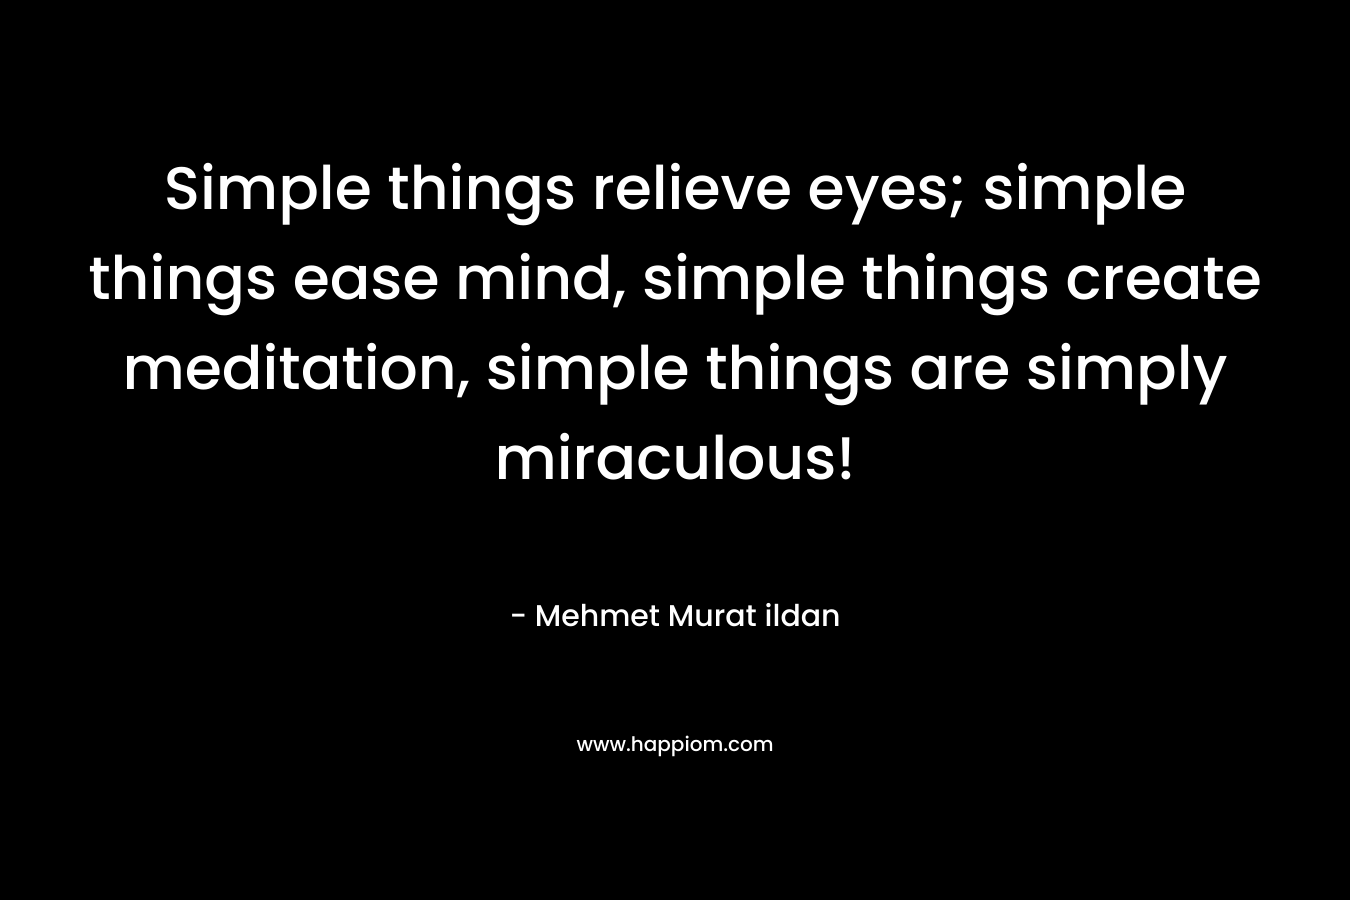 Simple things relieve eyes; simple things ease mind, simple things create meditation, simple things are simply miraculous!